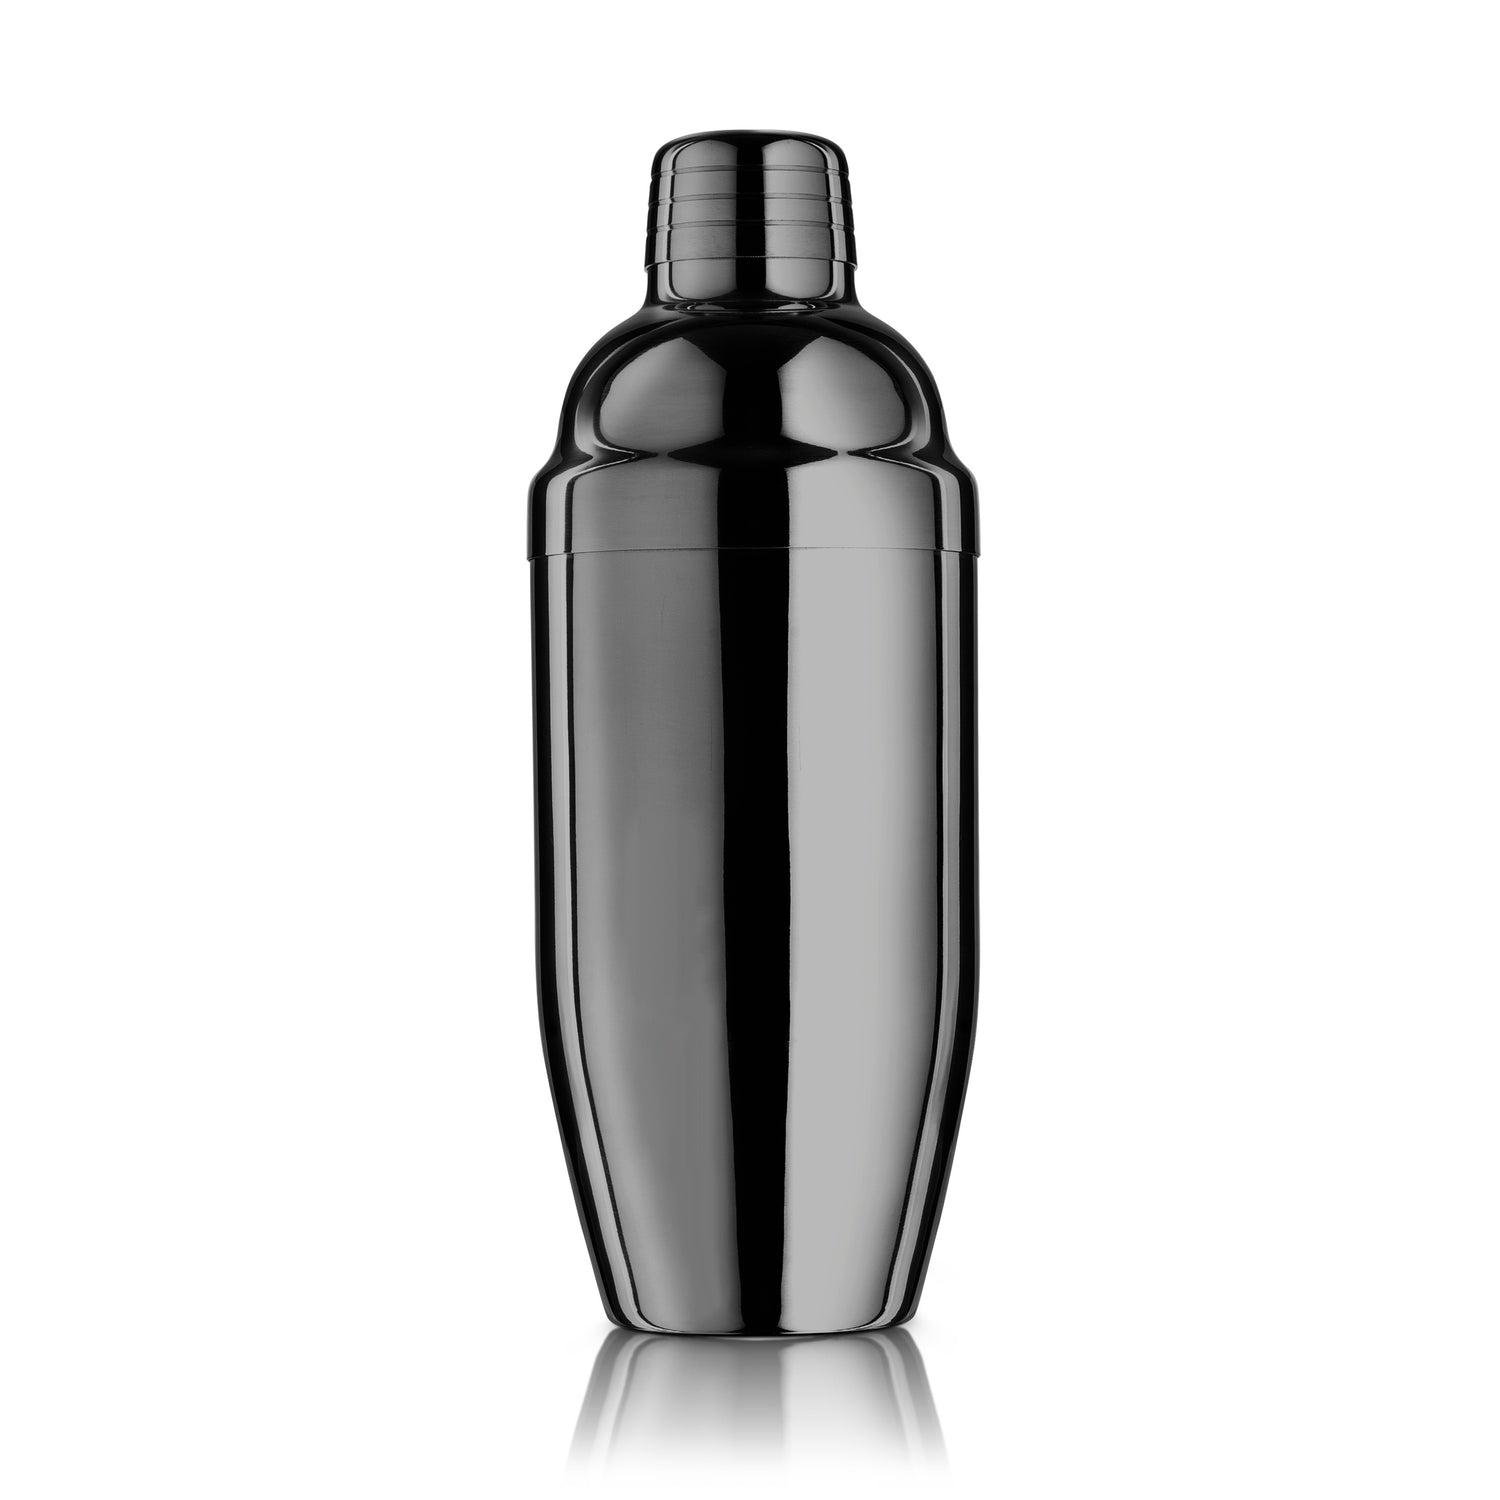 Double-wall Stainless Steel Cocktail Shaker - Black Chrome